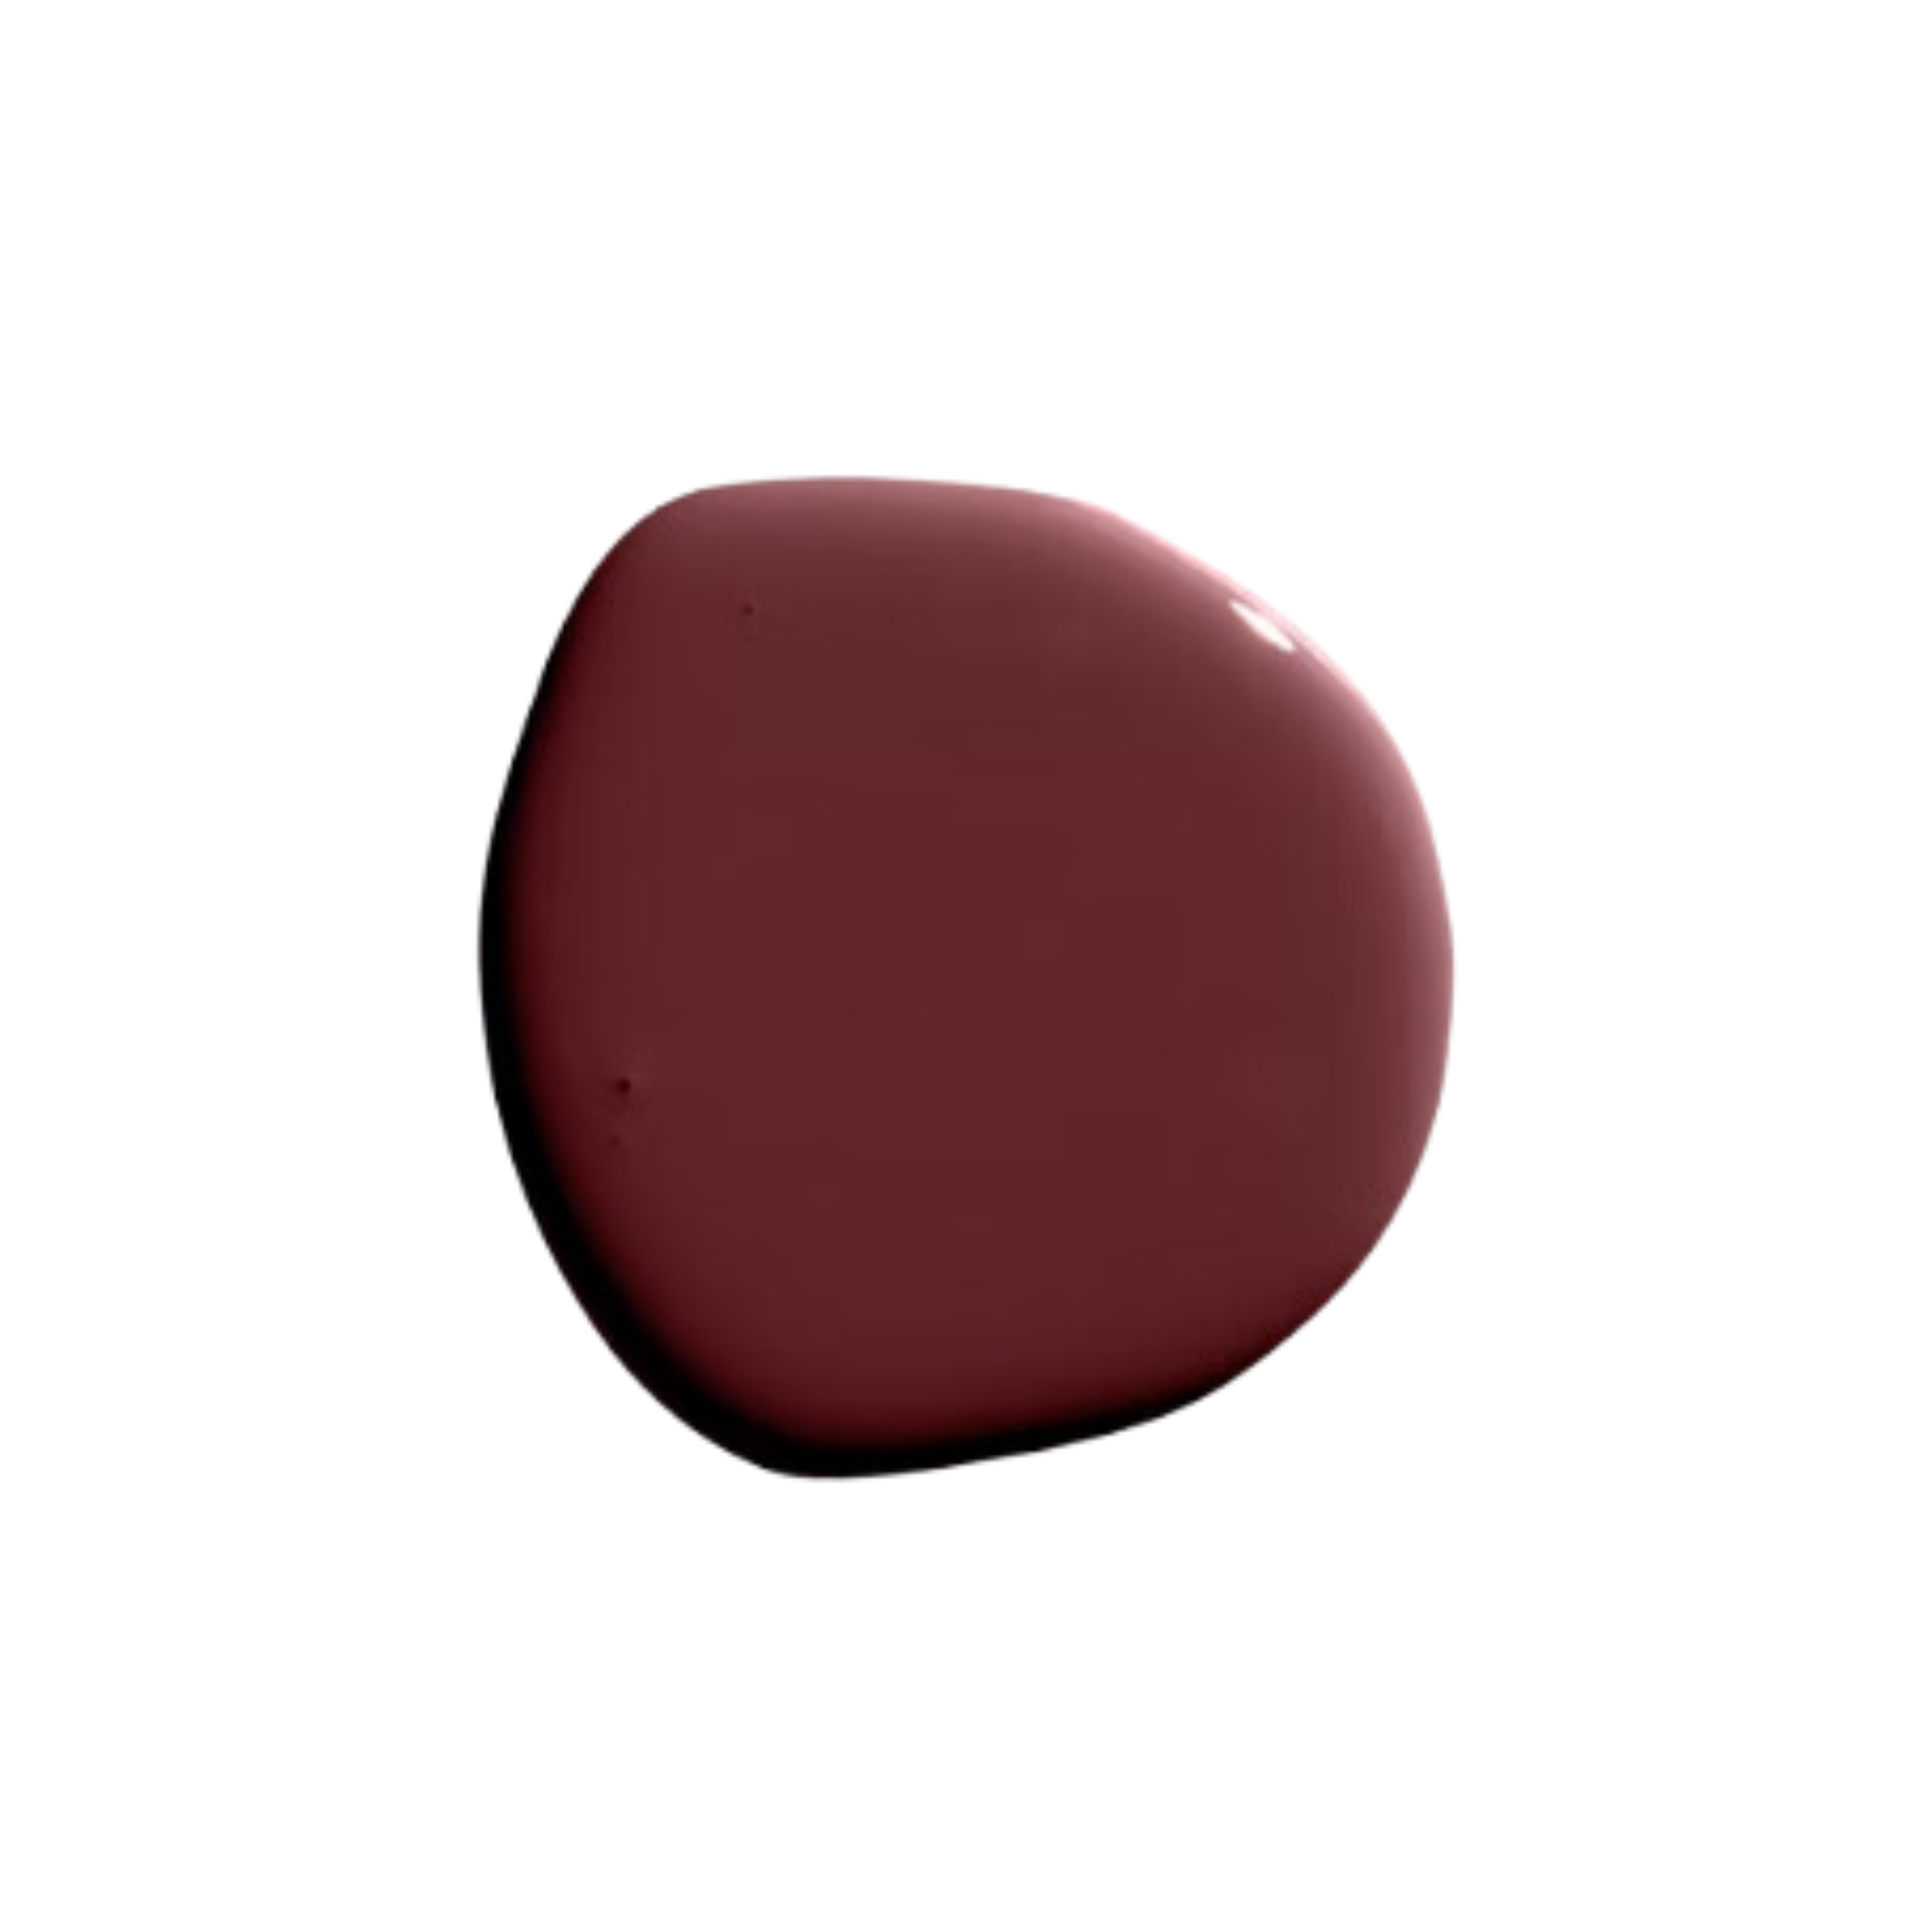 A swatch of deep maroon paint